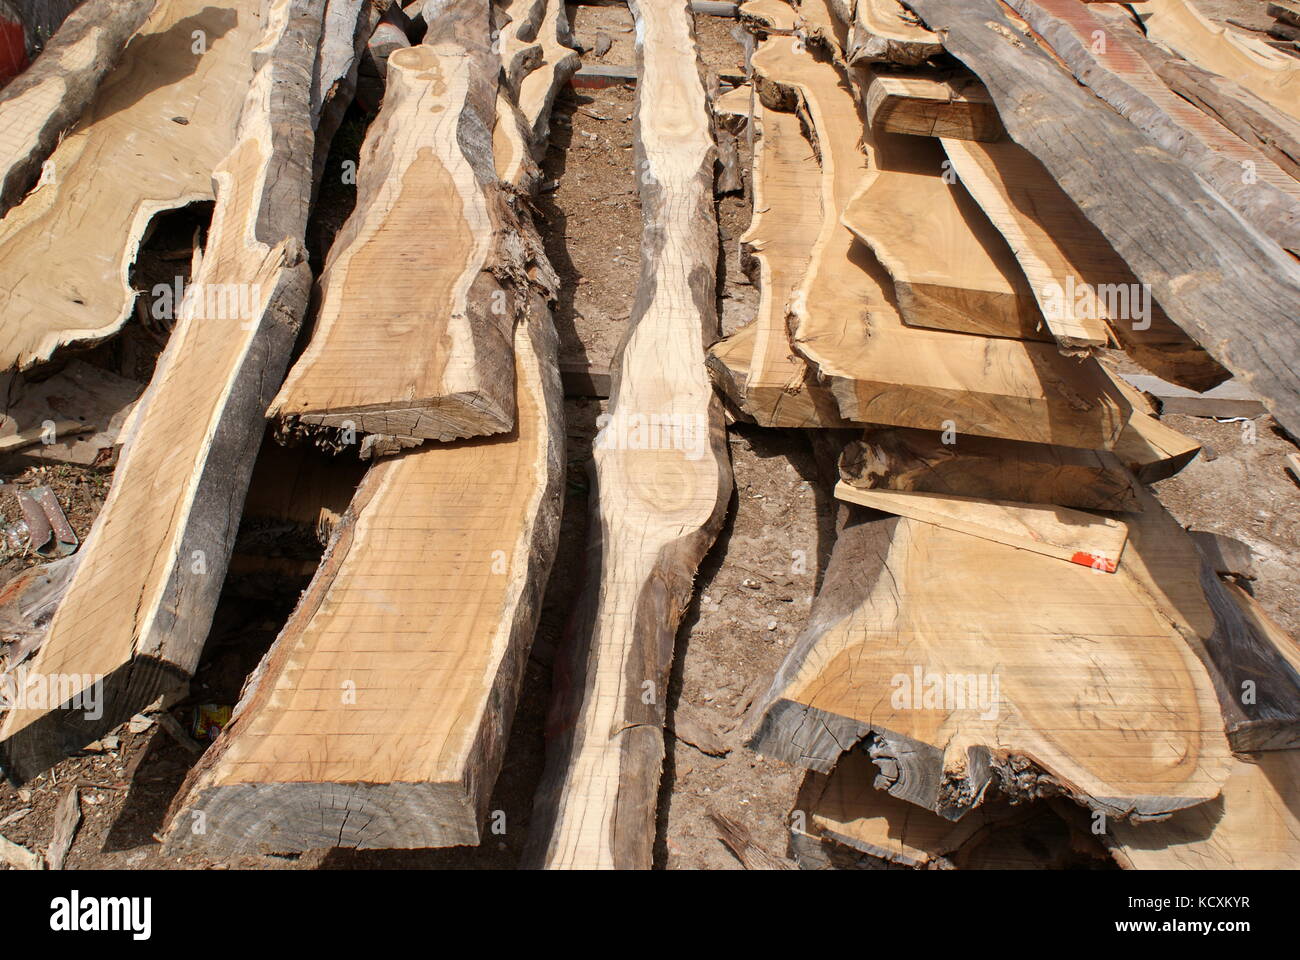 Eucalyptus wood planks stored ready to be used for boat building, Teboulba, Tunisia Stock Photo